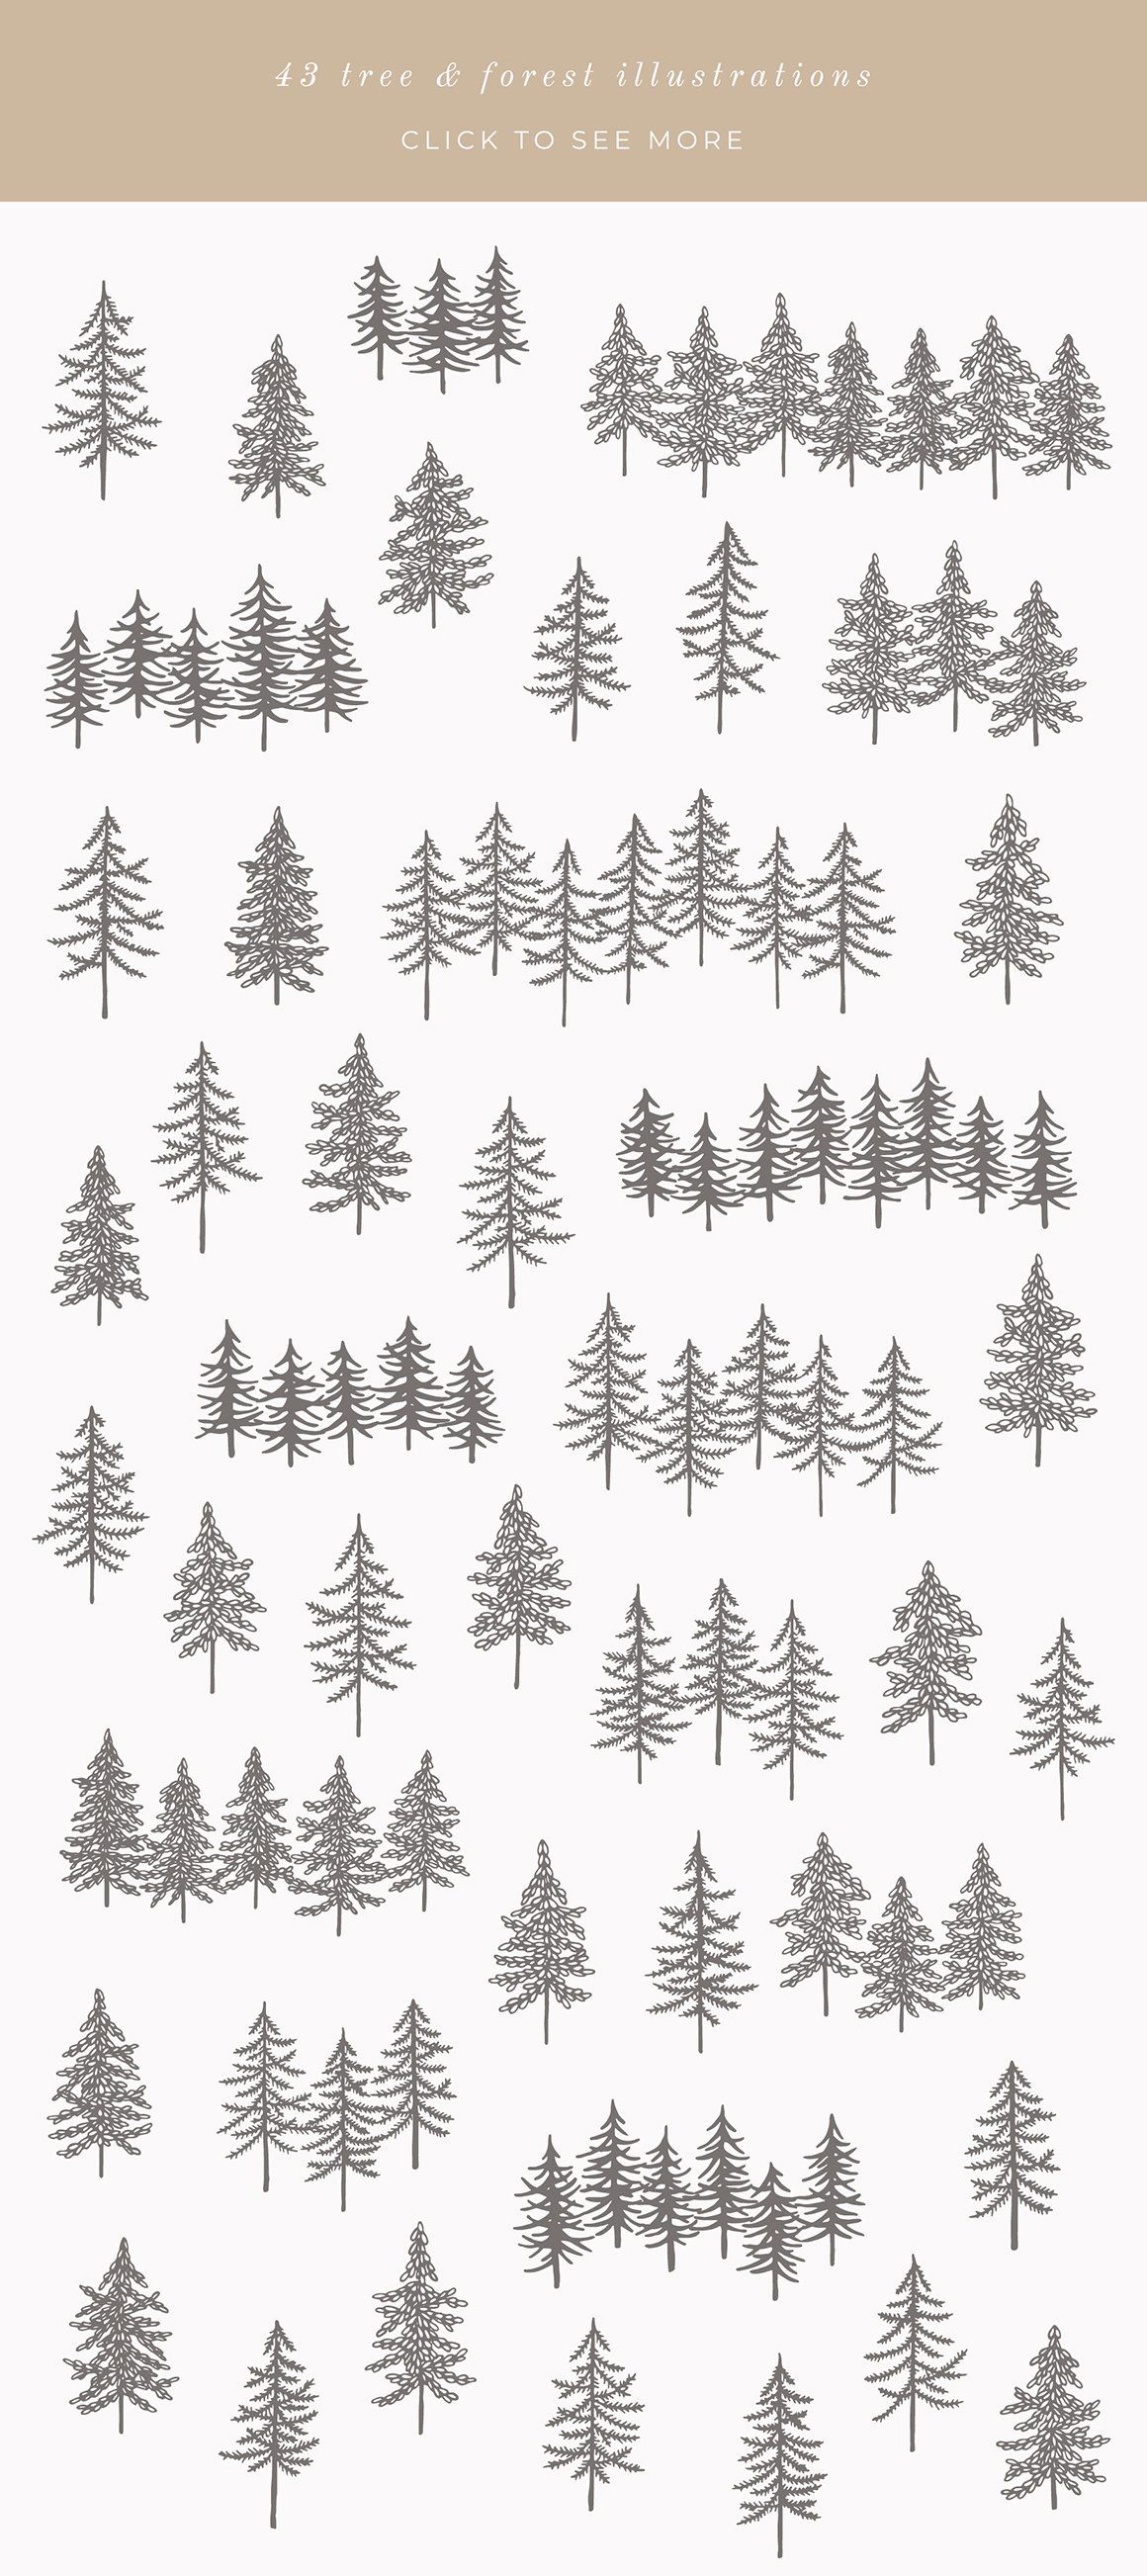 Forest Mountain Vector Illustrations